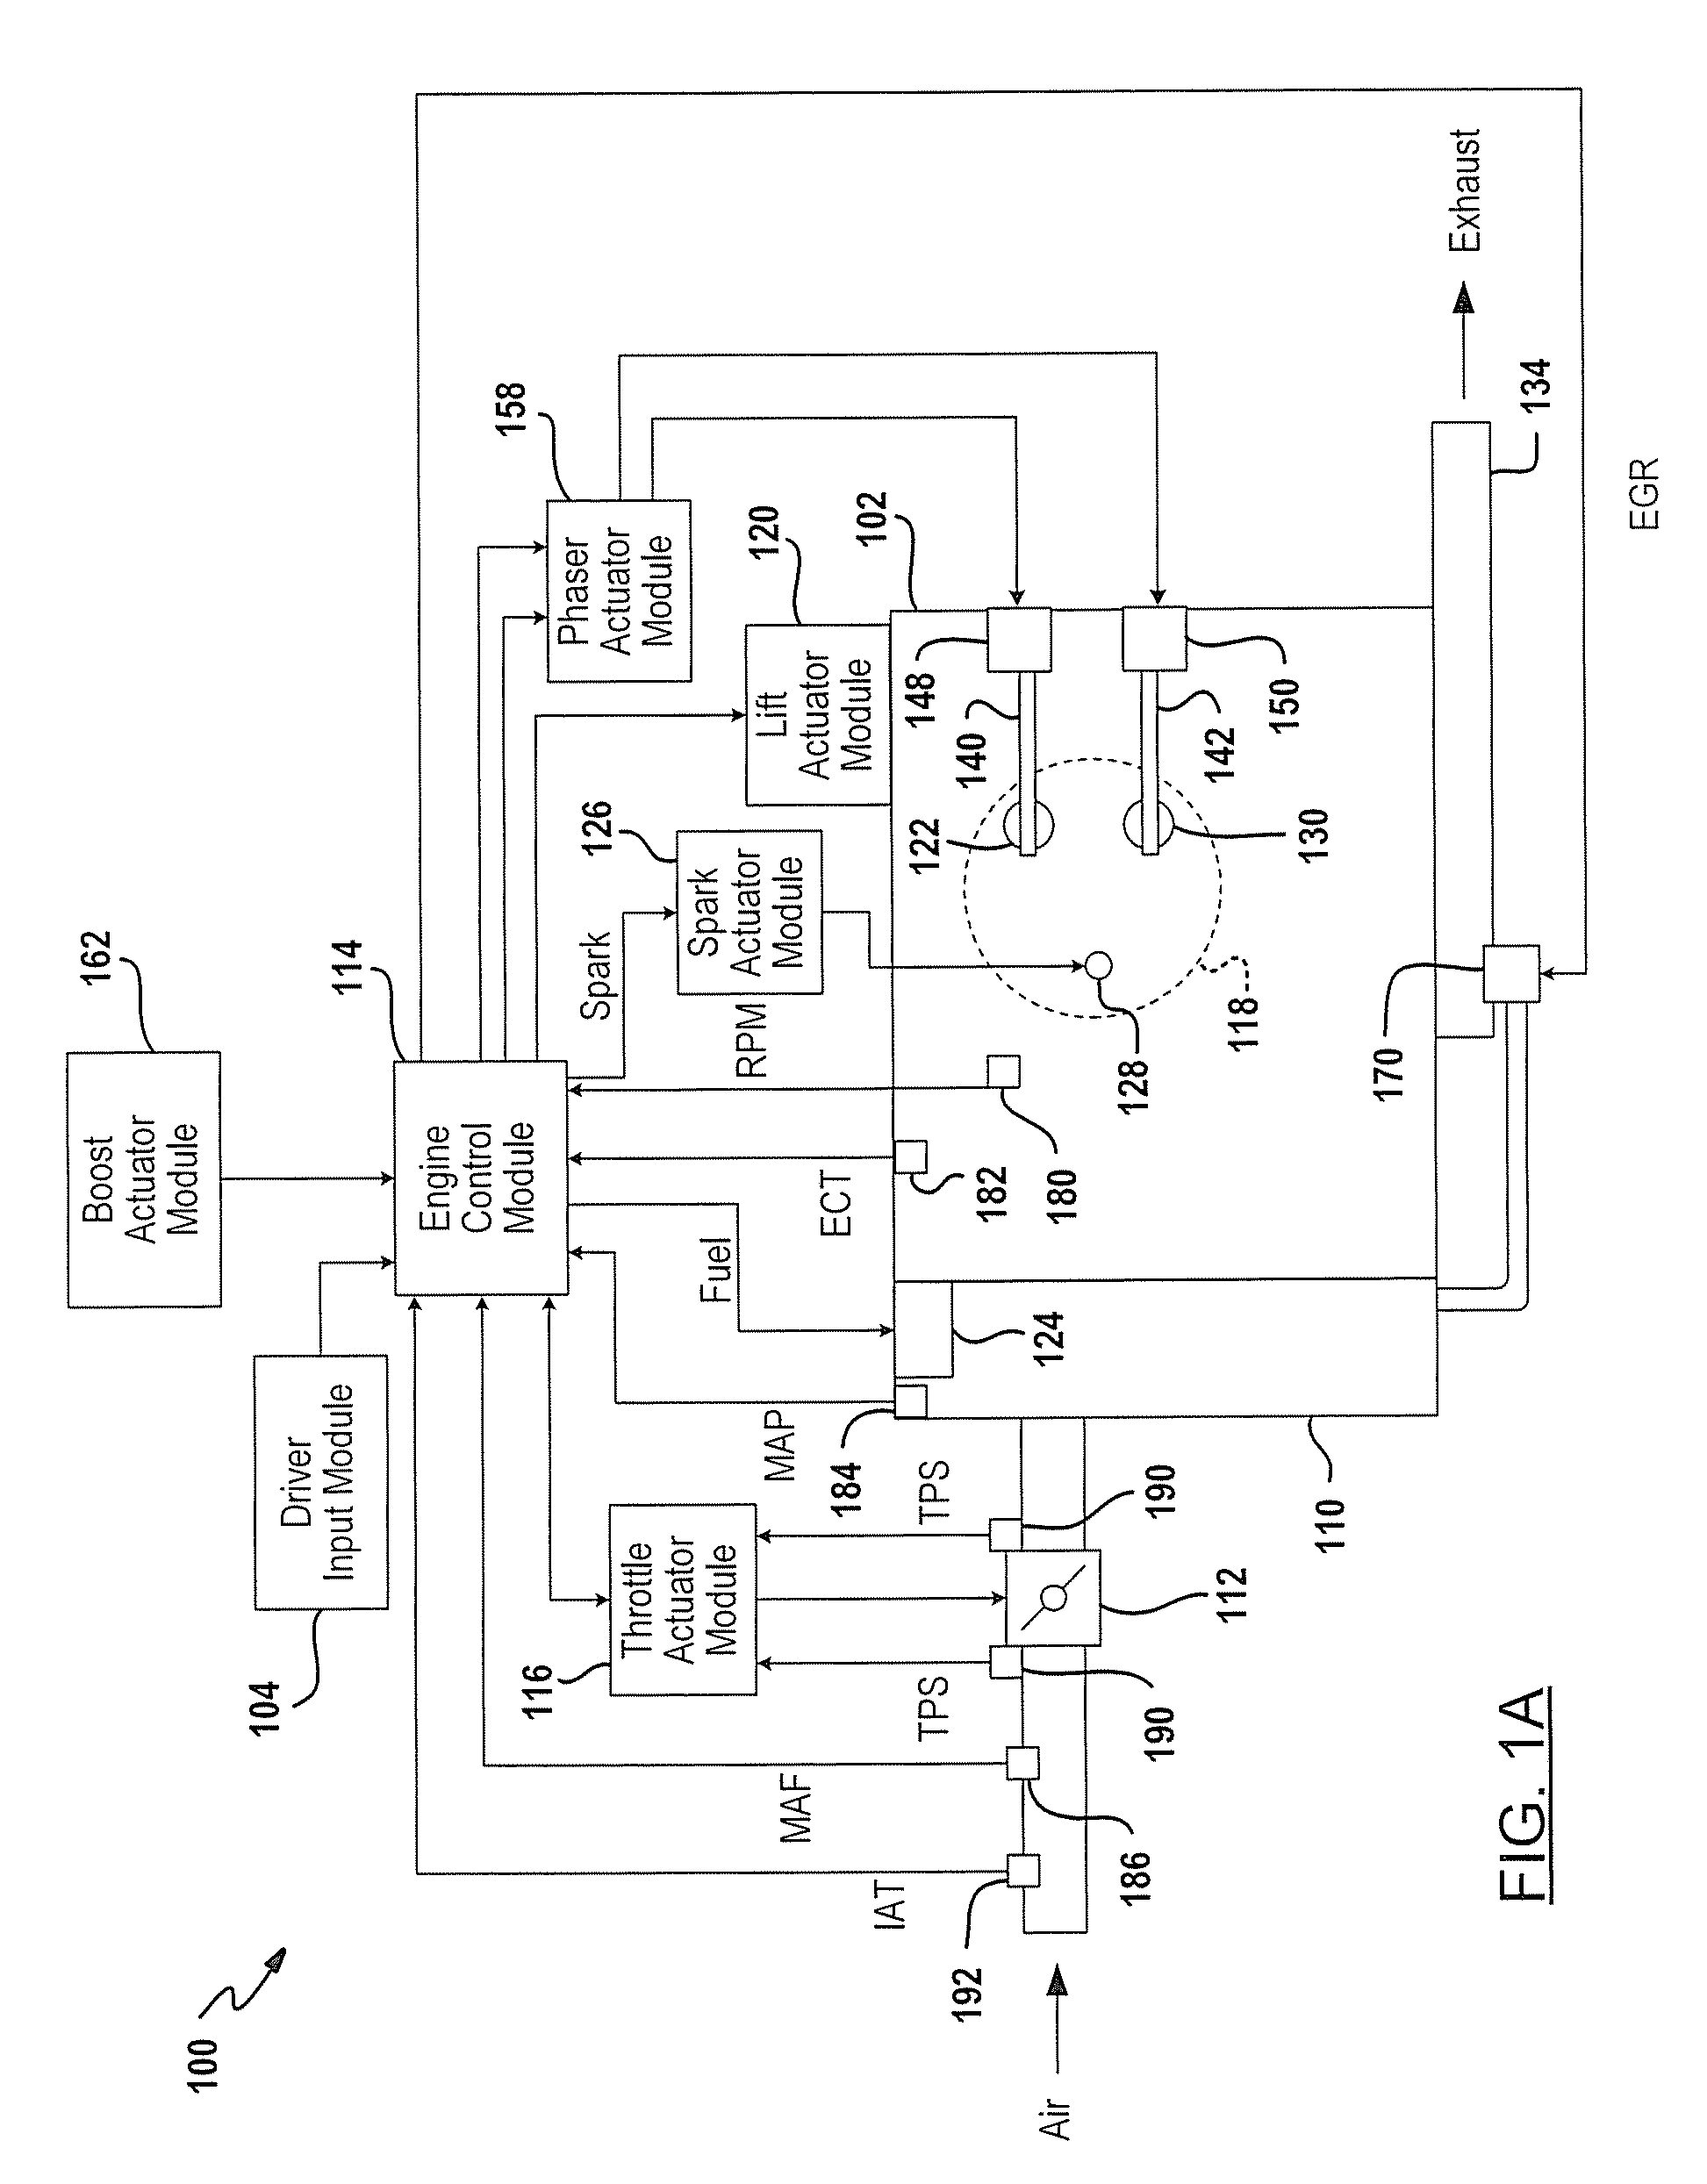 Hcci mode switching control system and method